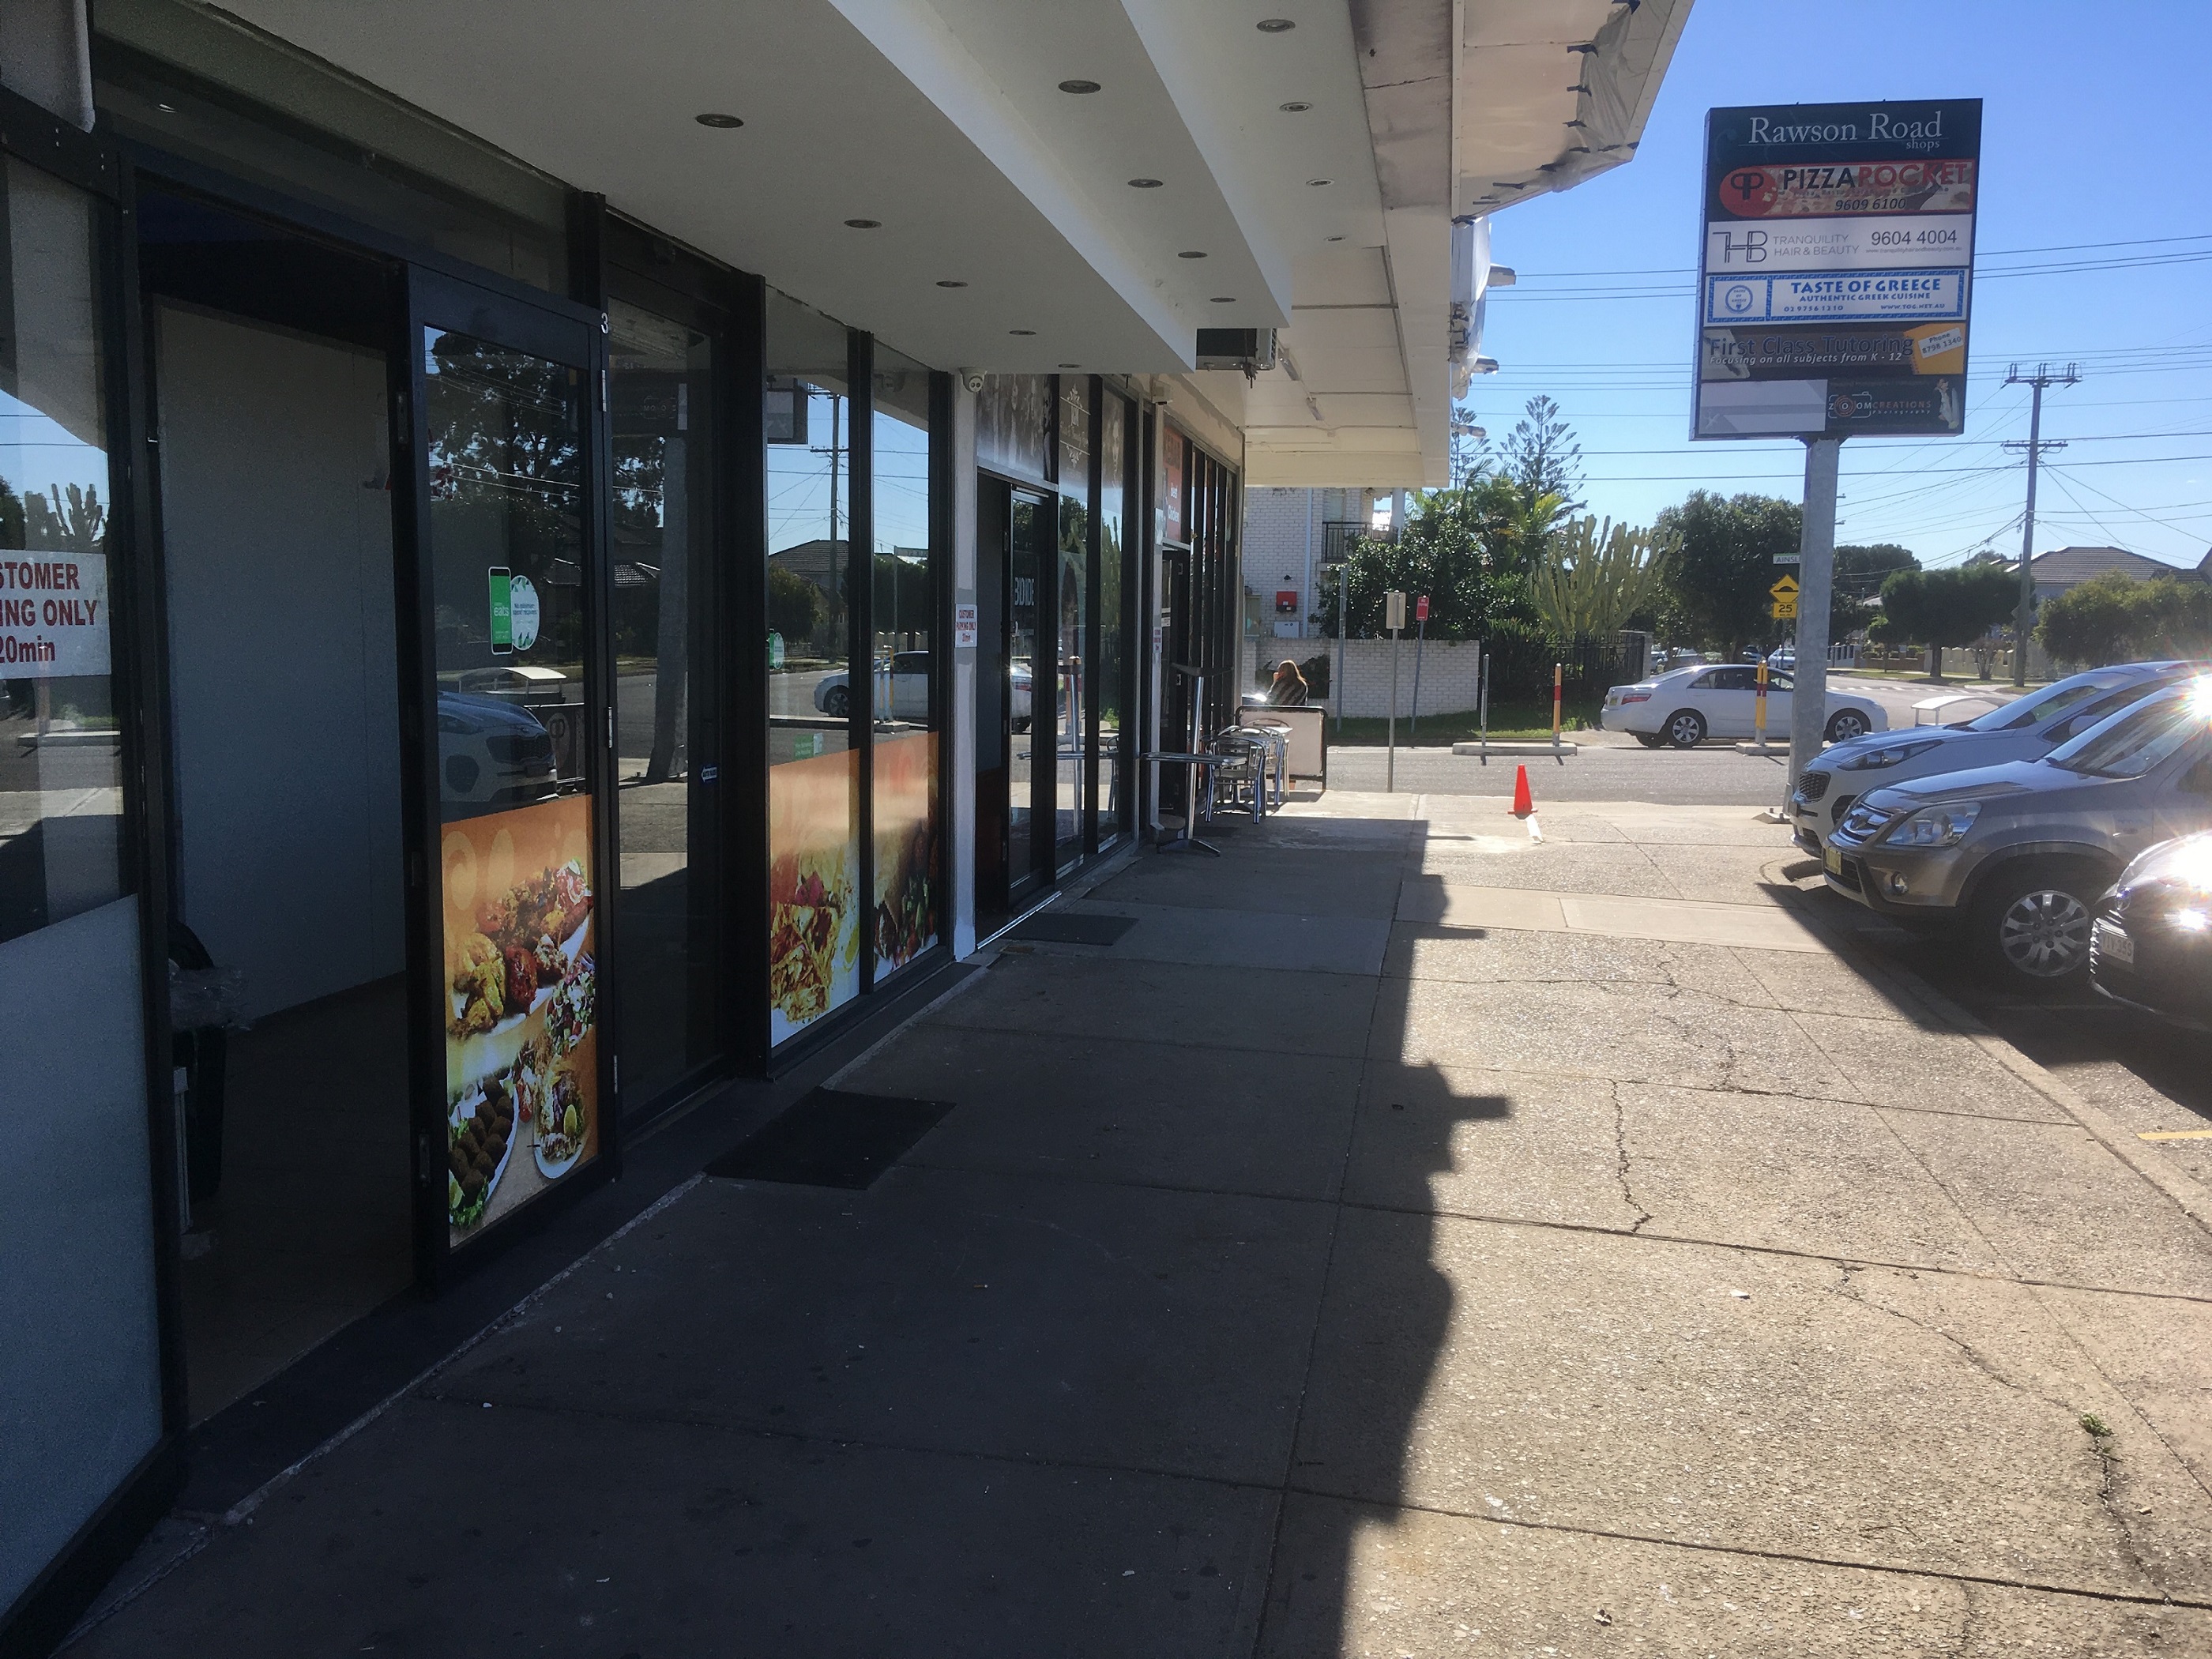 Retail property for lease in fairfield west 2